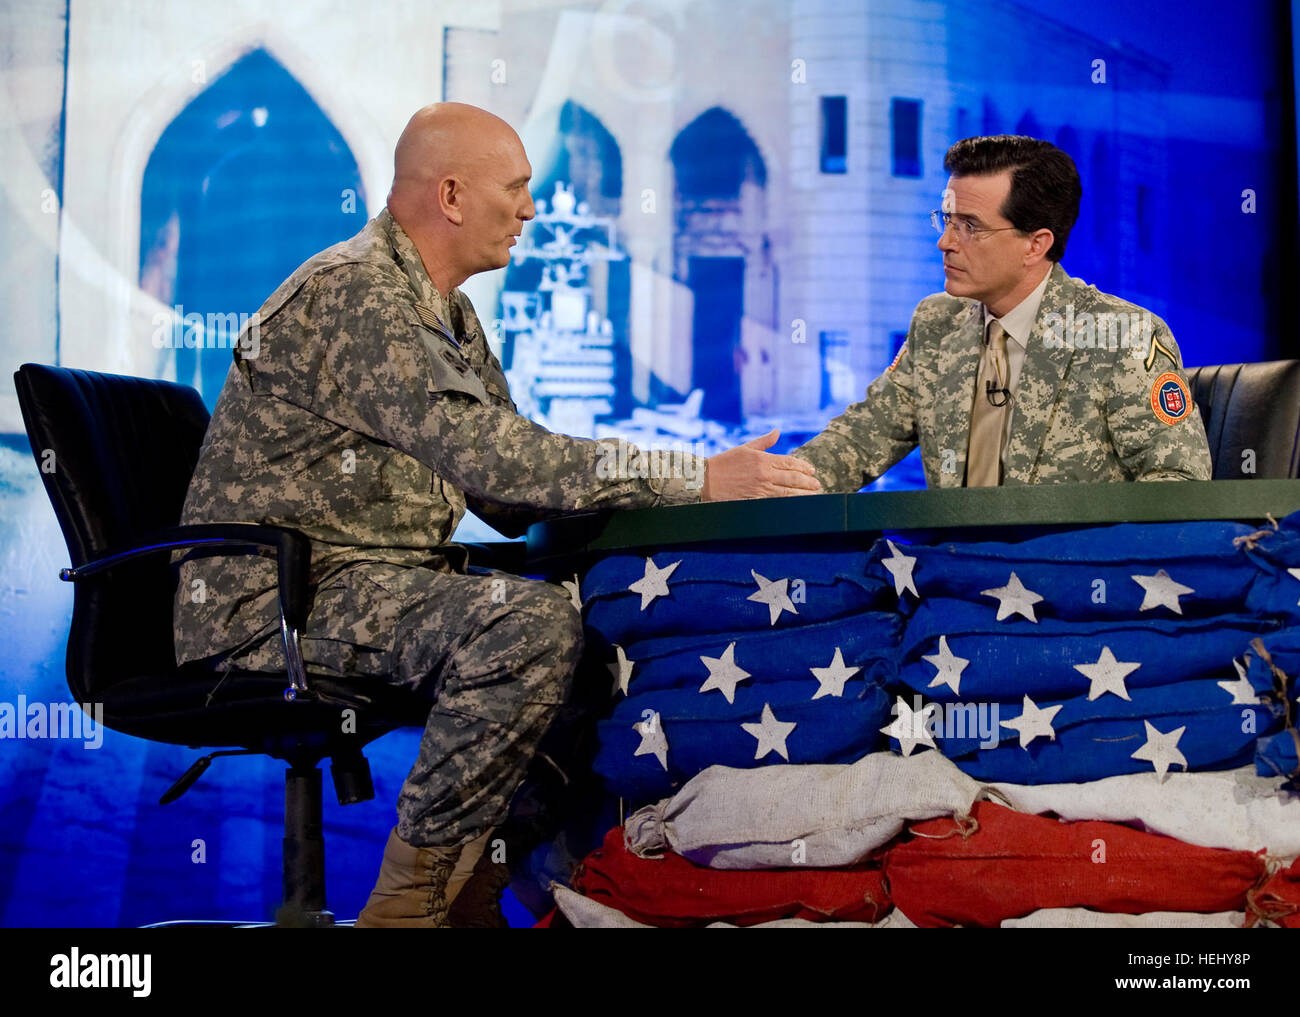 Stephen Colbert interviews special guest Gen.l Ray Odierno, Commanding General of the Multi-National Force-Iraq during Monday night's episode of 'The Colbert Report' Operation Iraqi Stephen 178744 Stock Photo